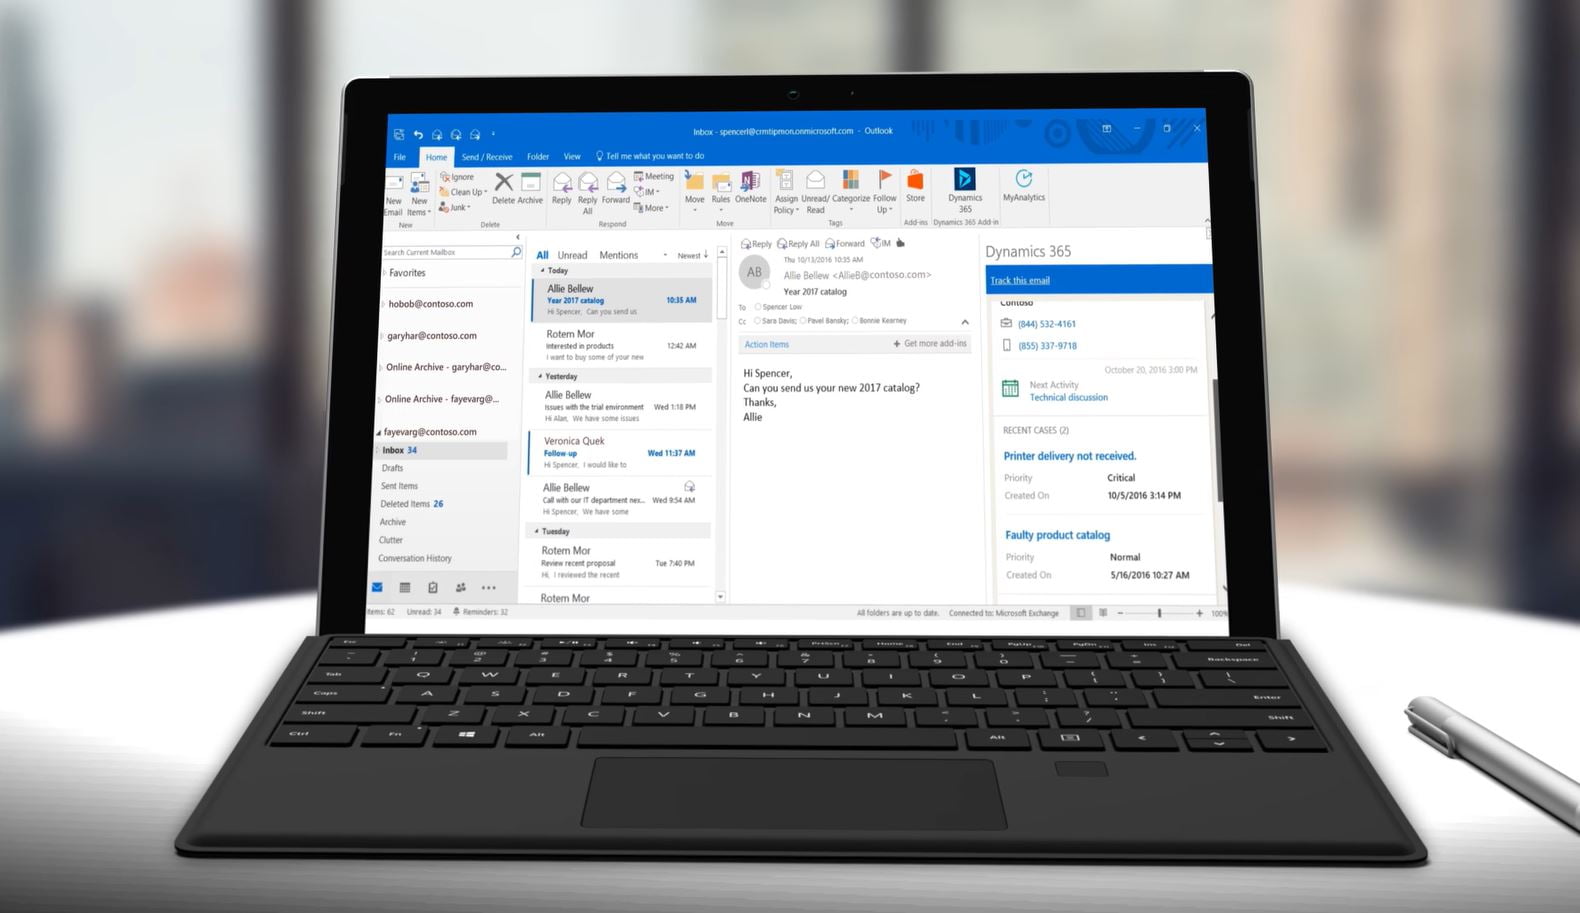 Microsoft will unify mail and calendar apps with One Outlook